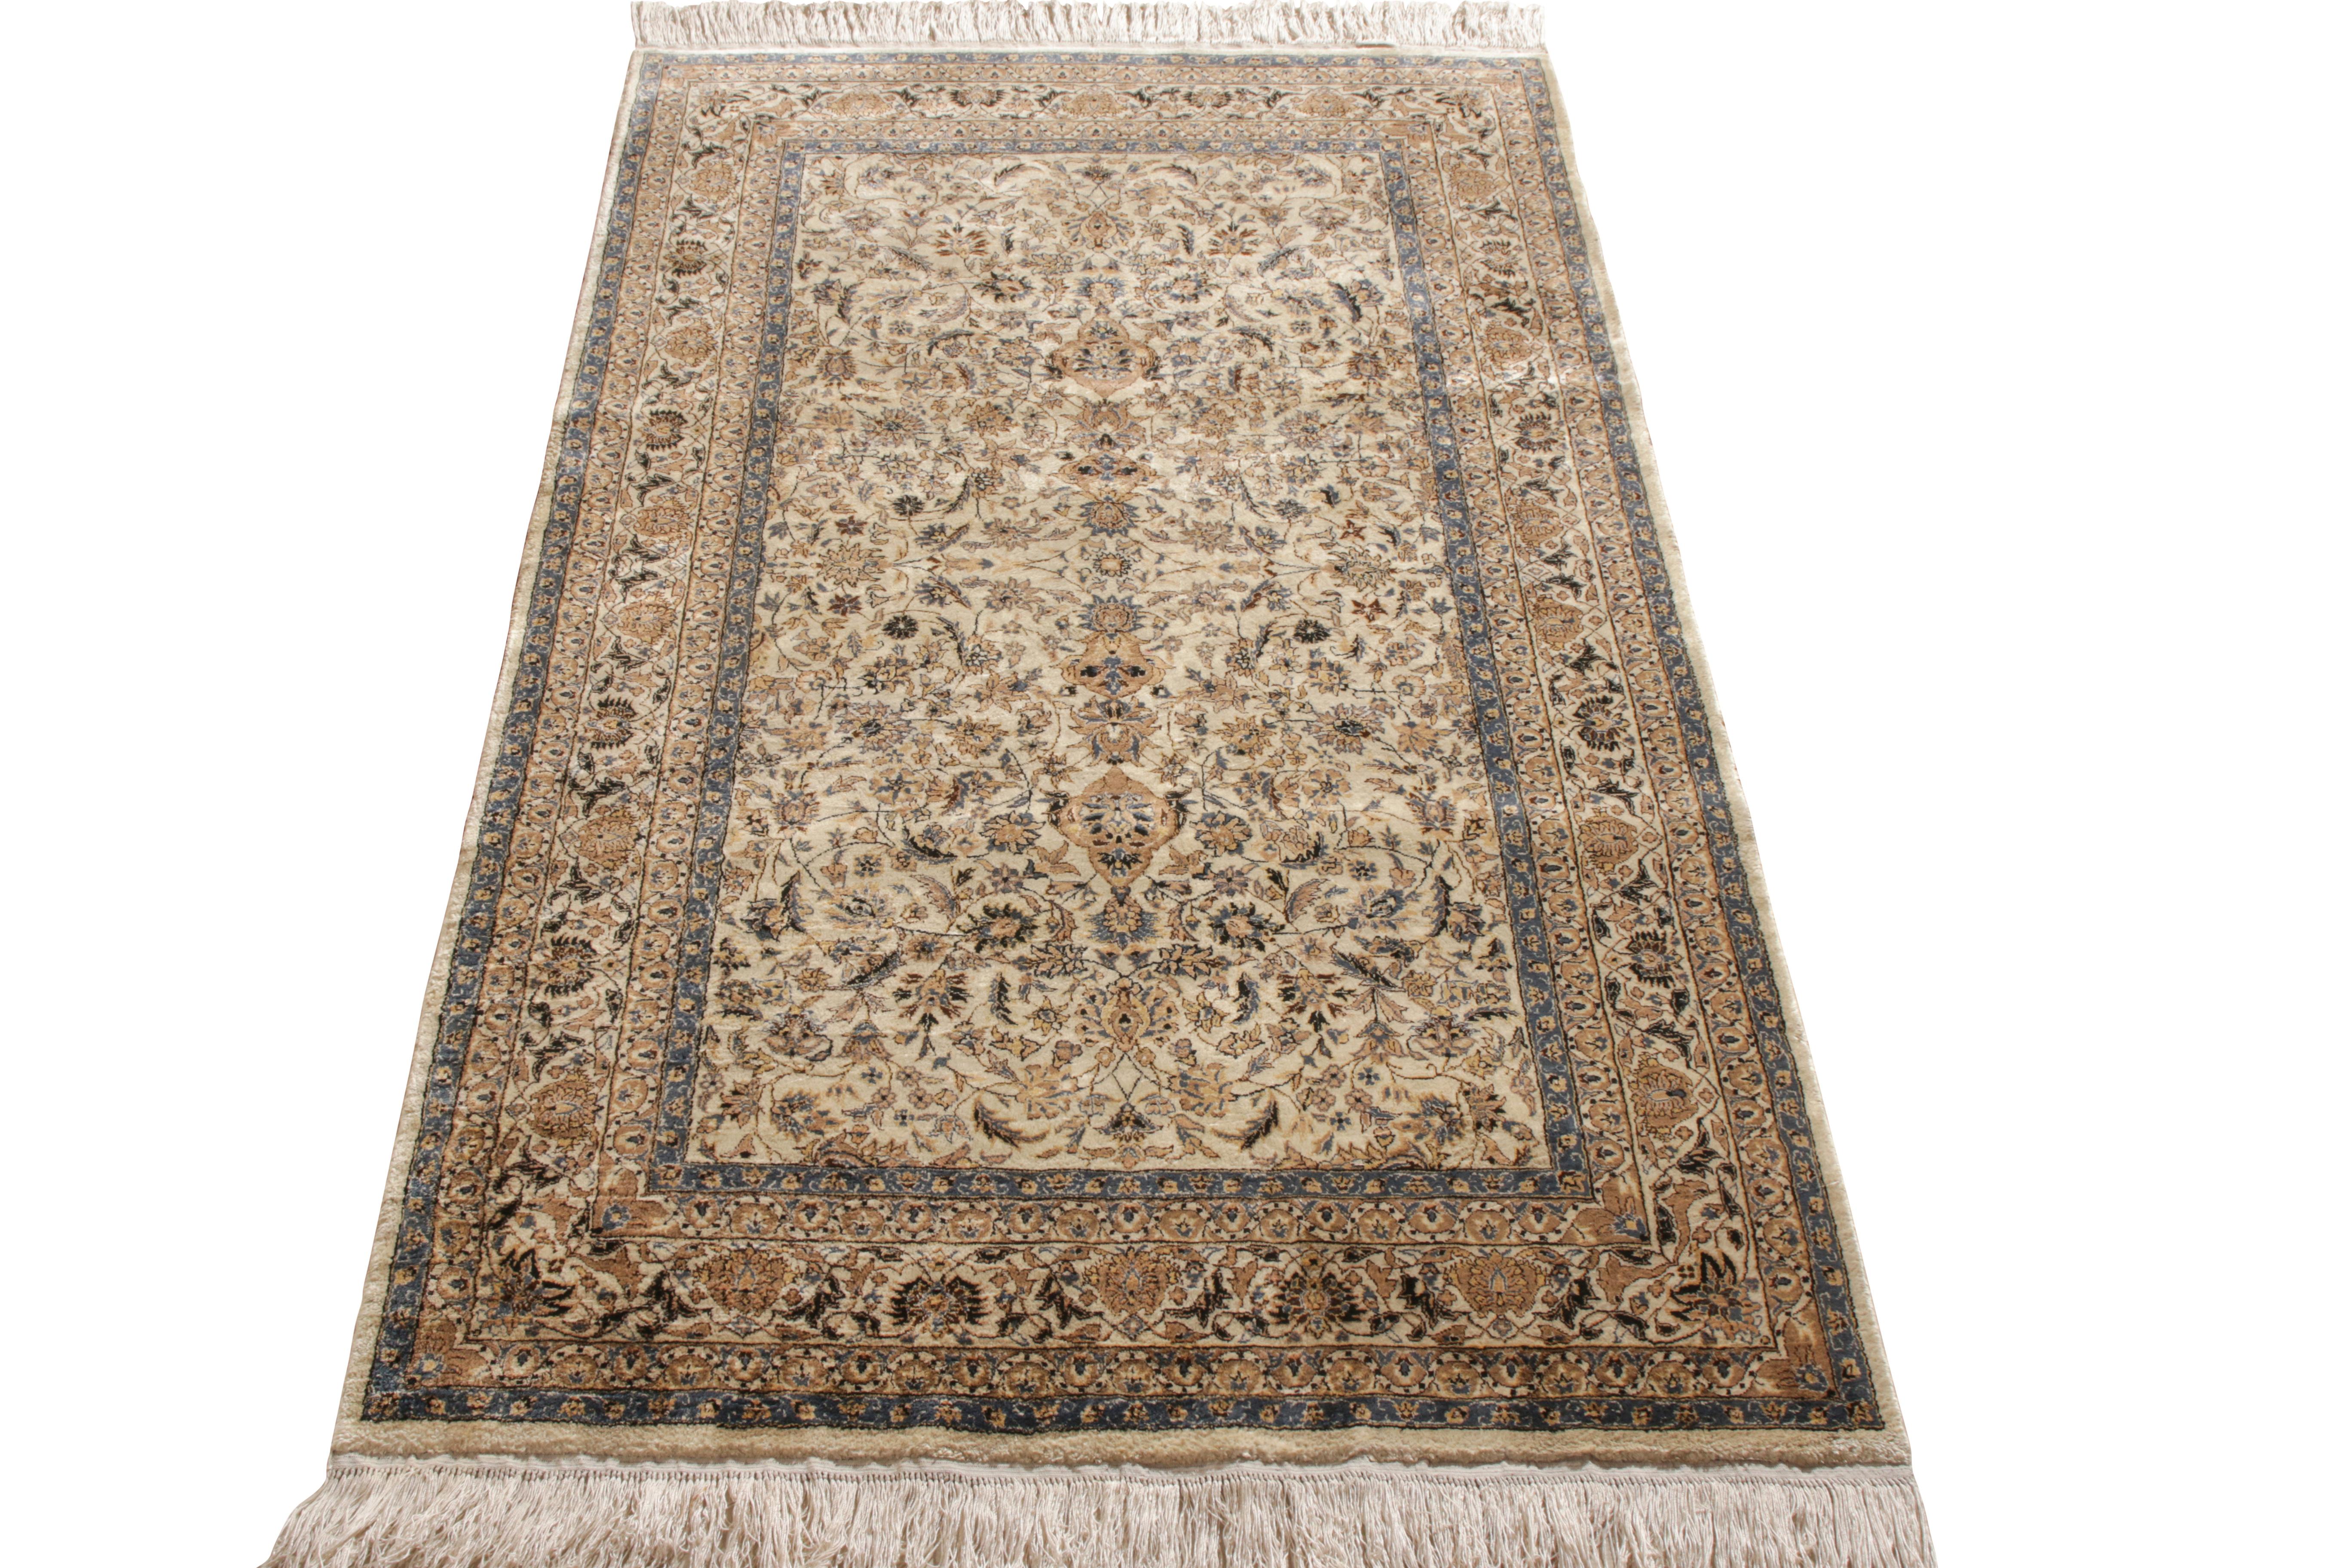 A hand knotted silk beauty joining a distinguished lineage of mid-century Persian rugs from Rug & Kilim’s Antique & Vintage collection. Originating circa 1950-1960 and sized at a versatile 3x5, the rug features a dense floral pattern on both the